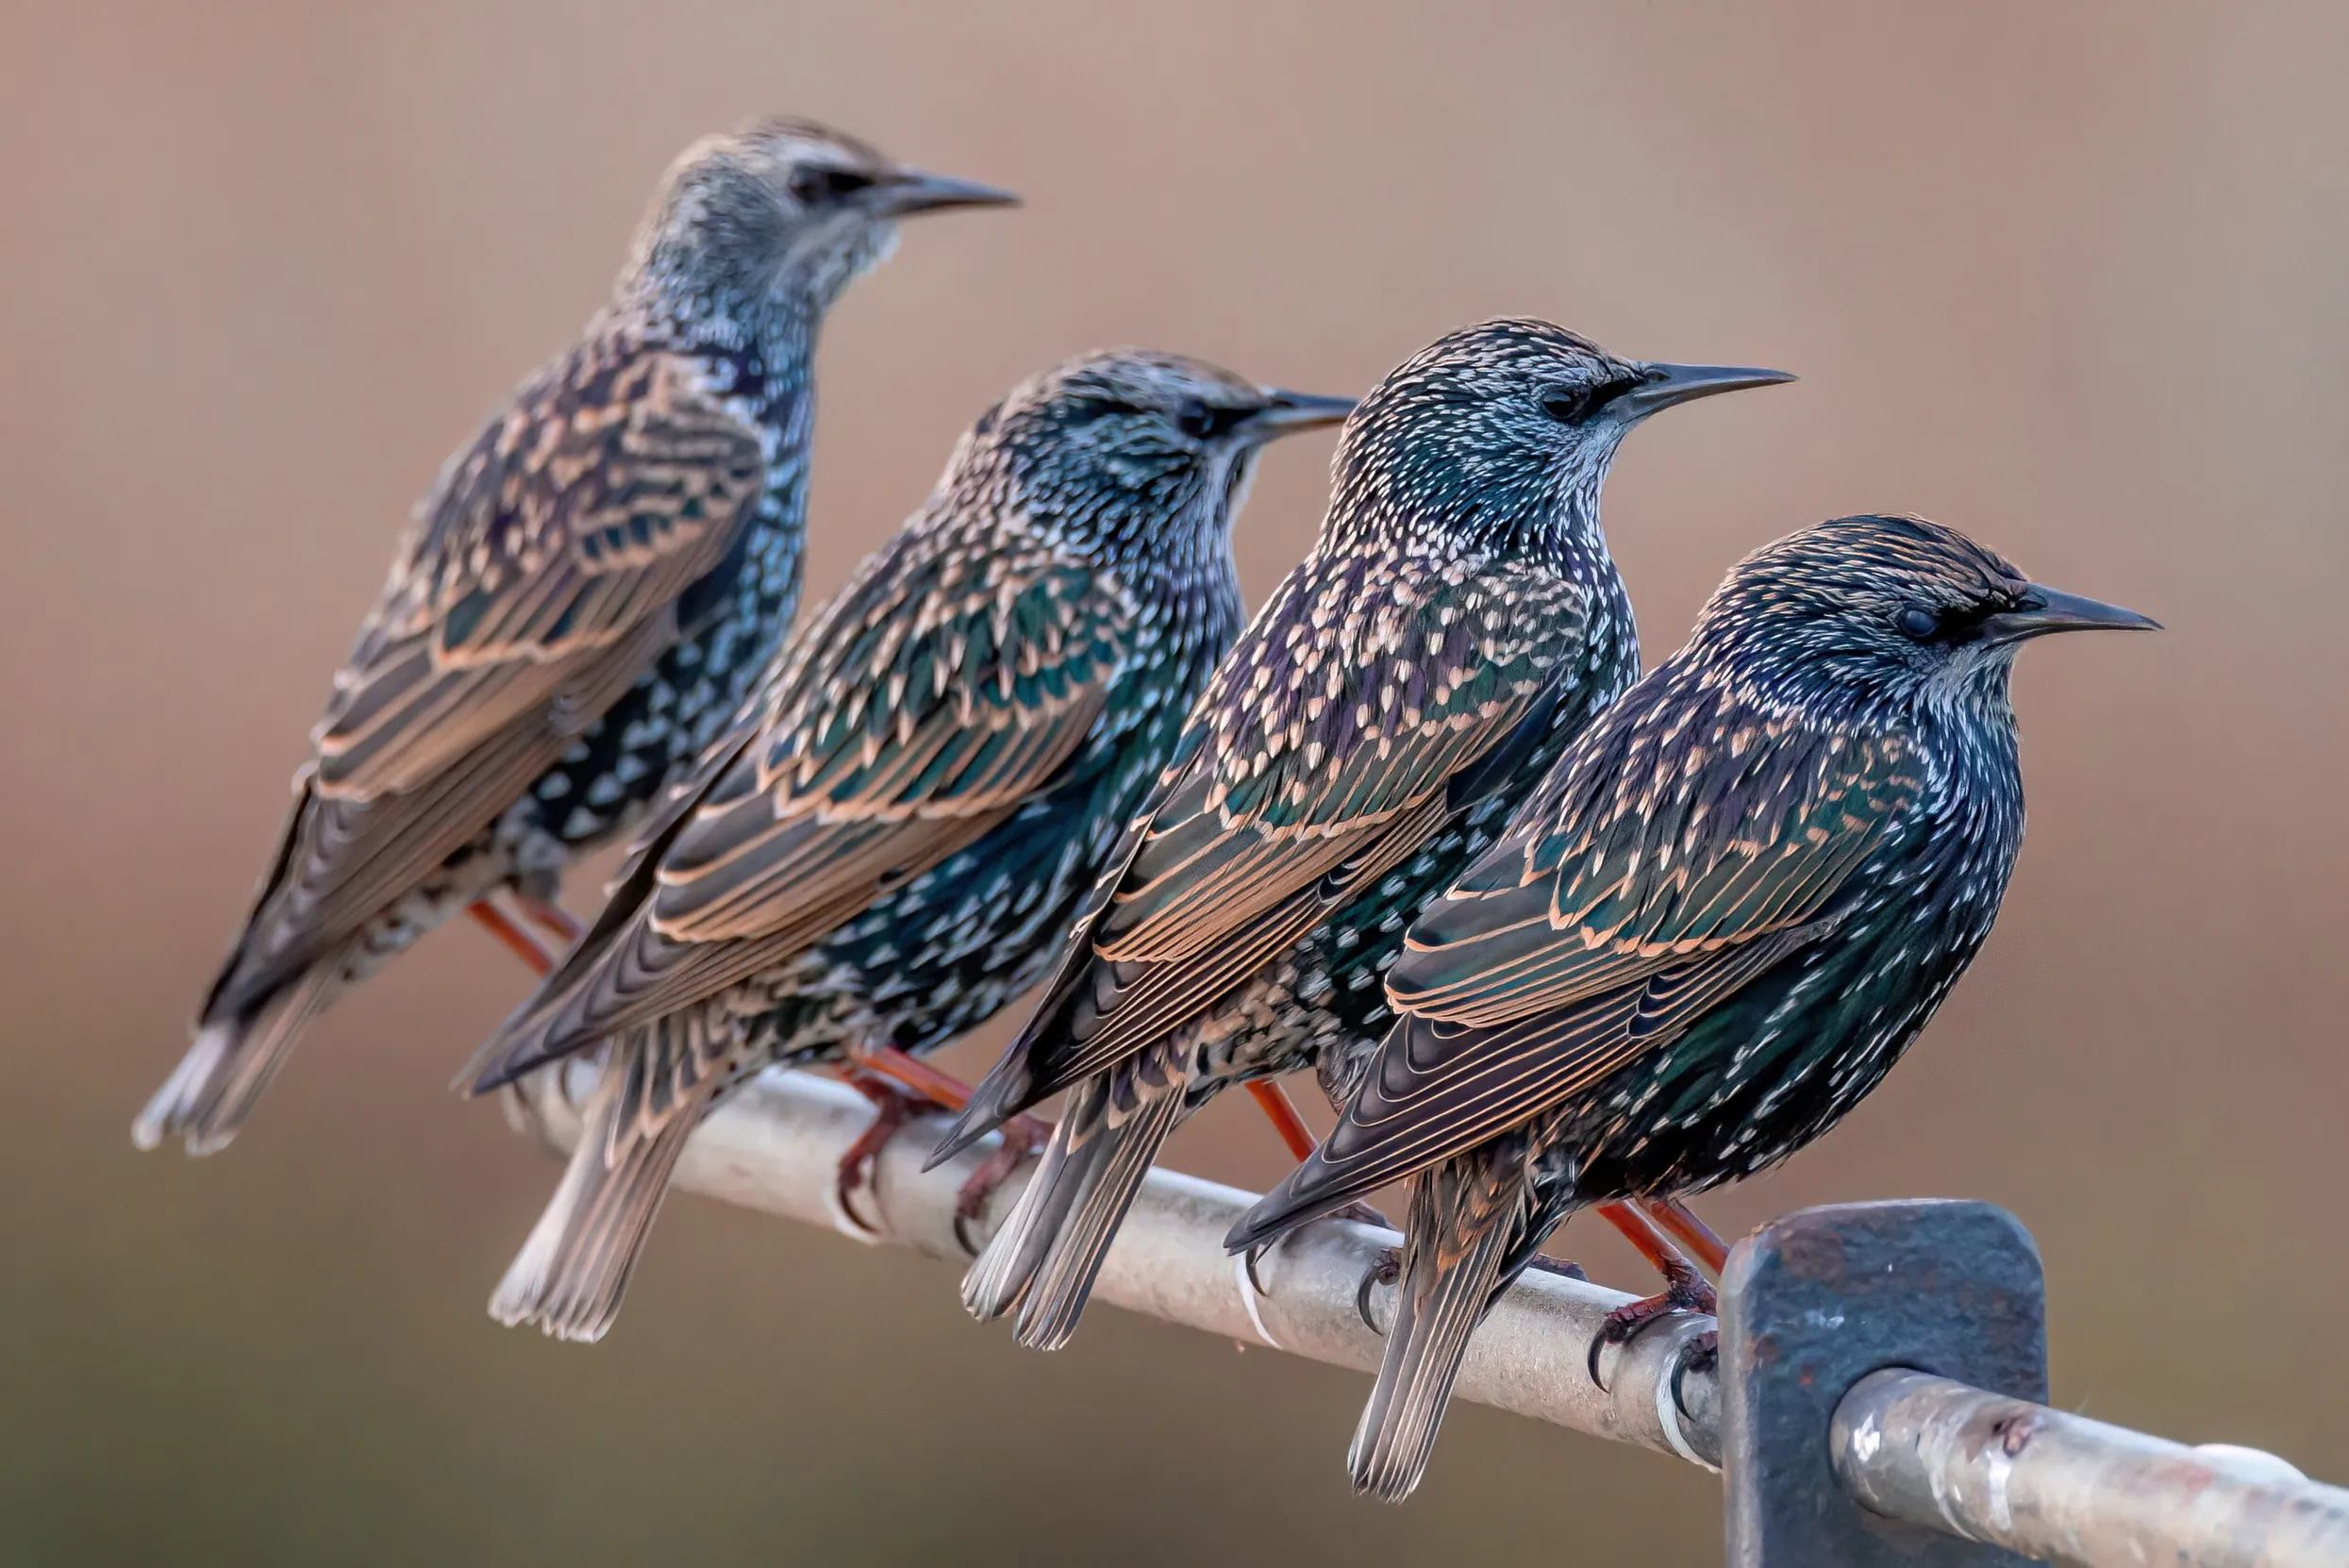 A group of Starlings stood on a metal pole.